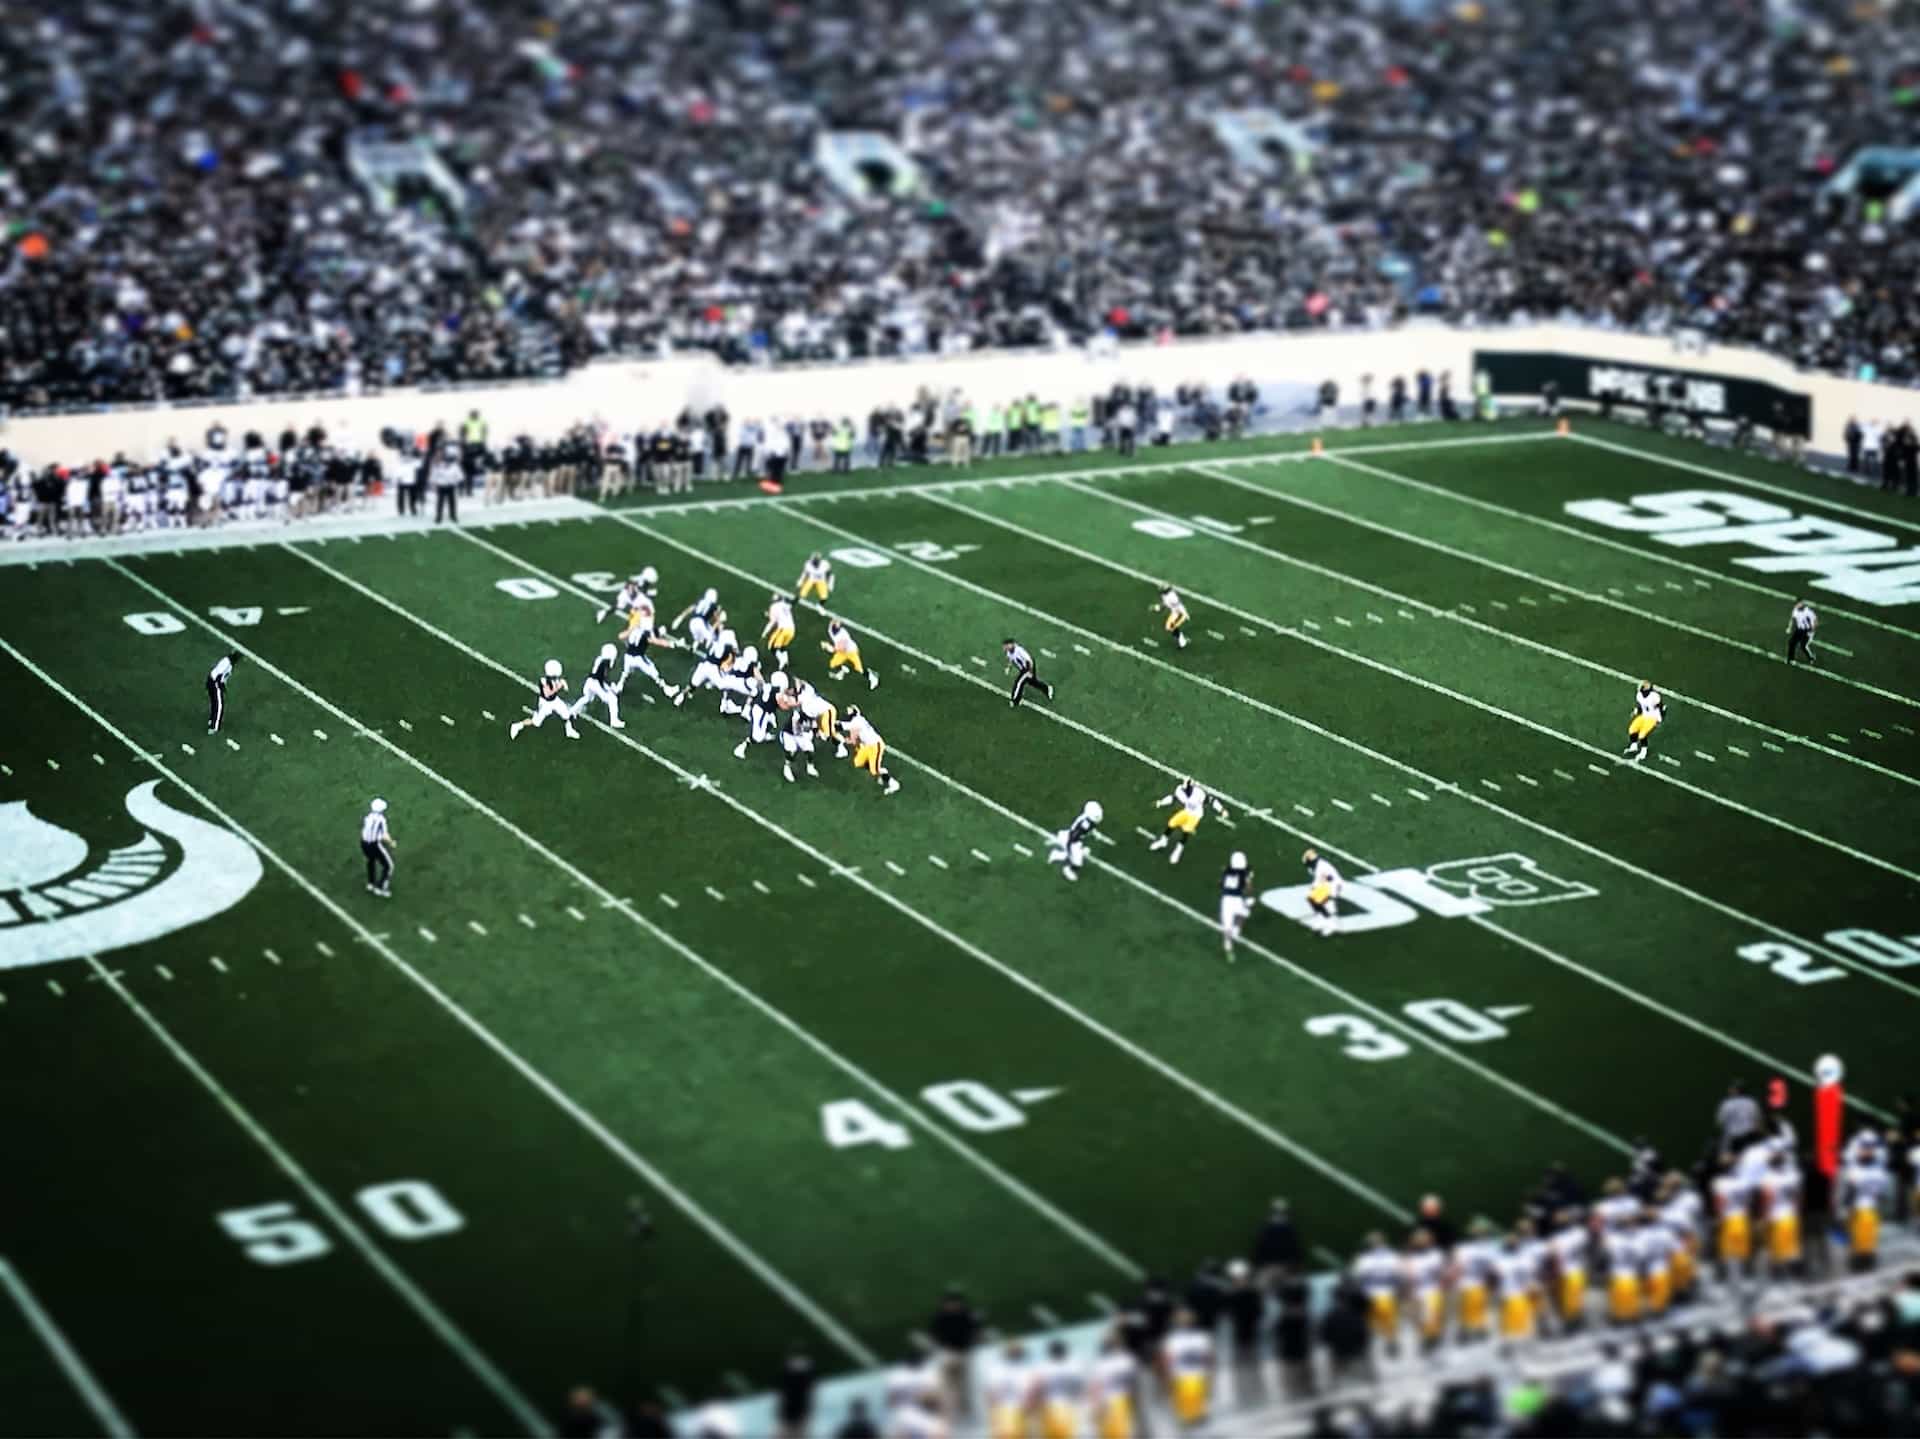 A game of American football underway on an outdoor field in a packed stadium.